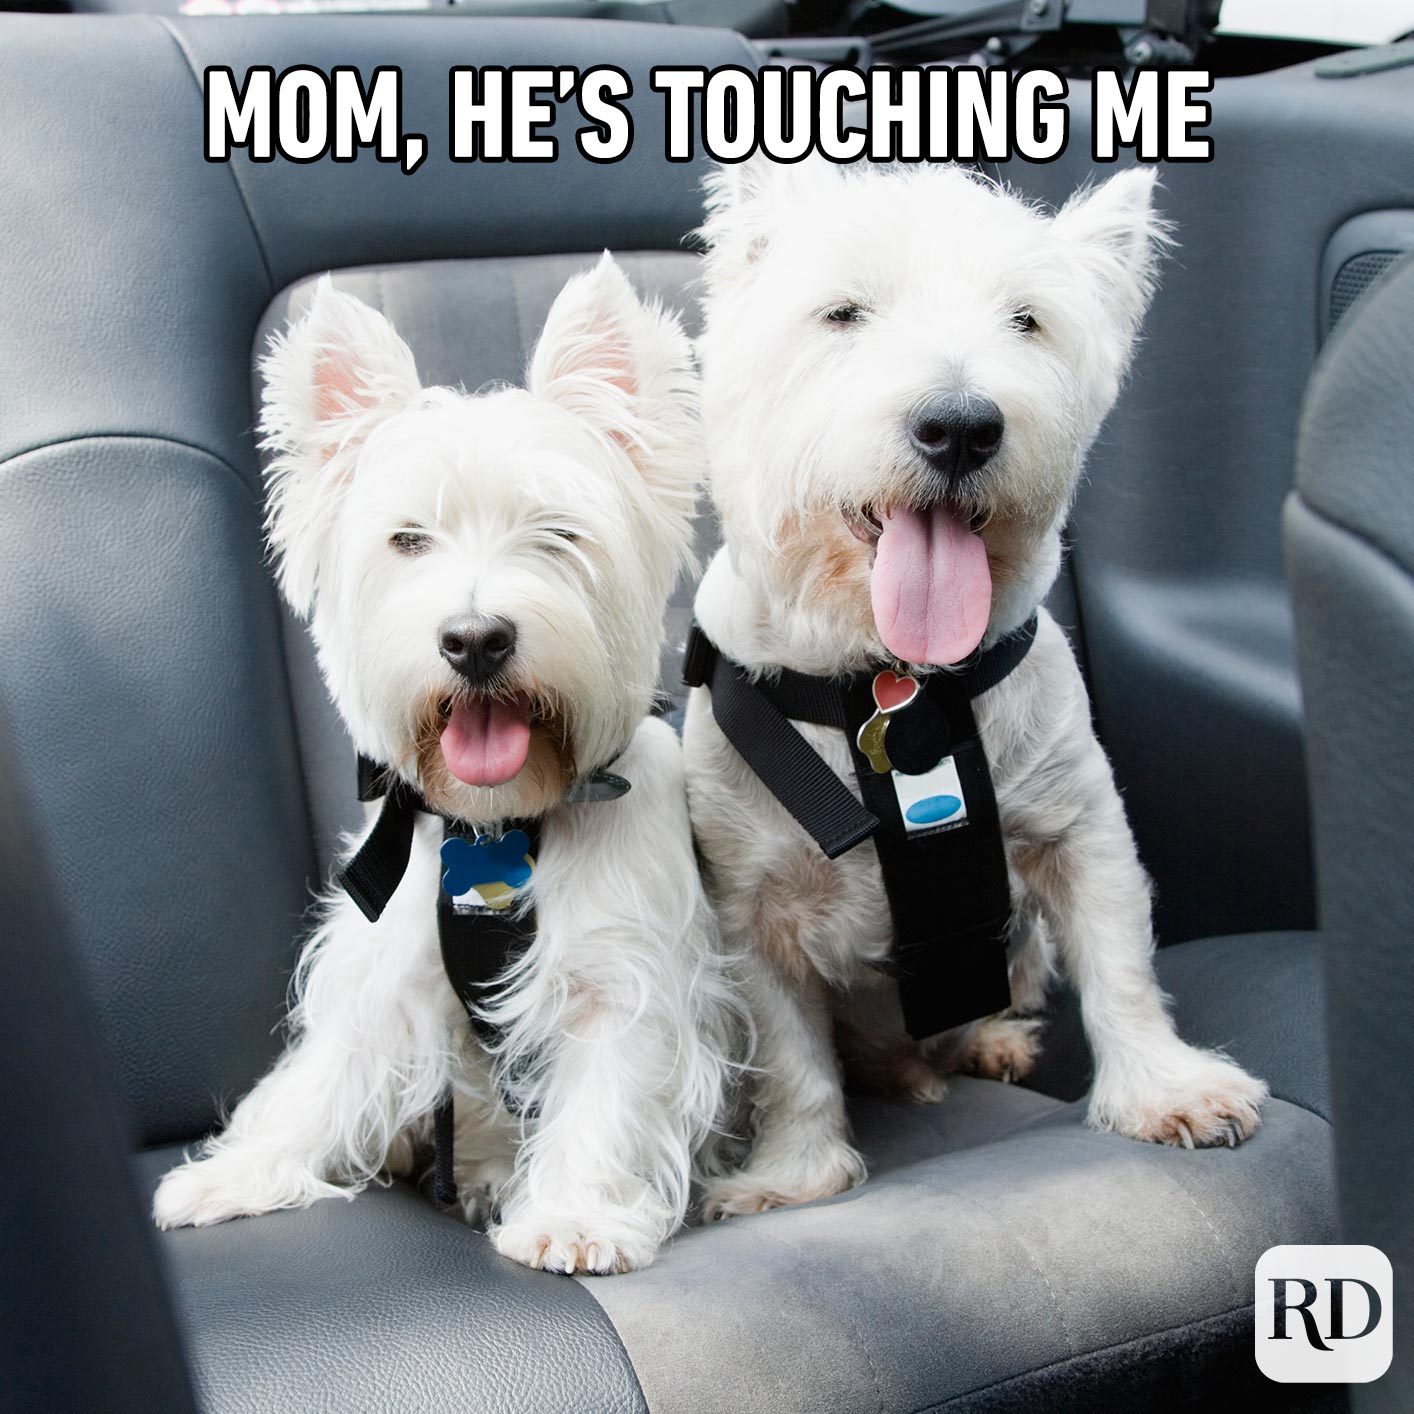 Two dogs in a car. Meme text: Mom, he's touching me